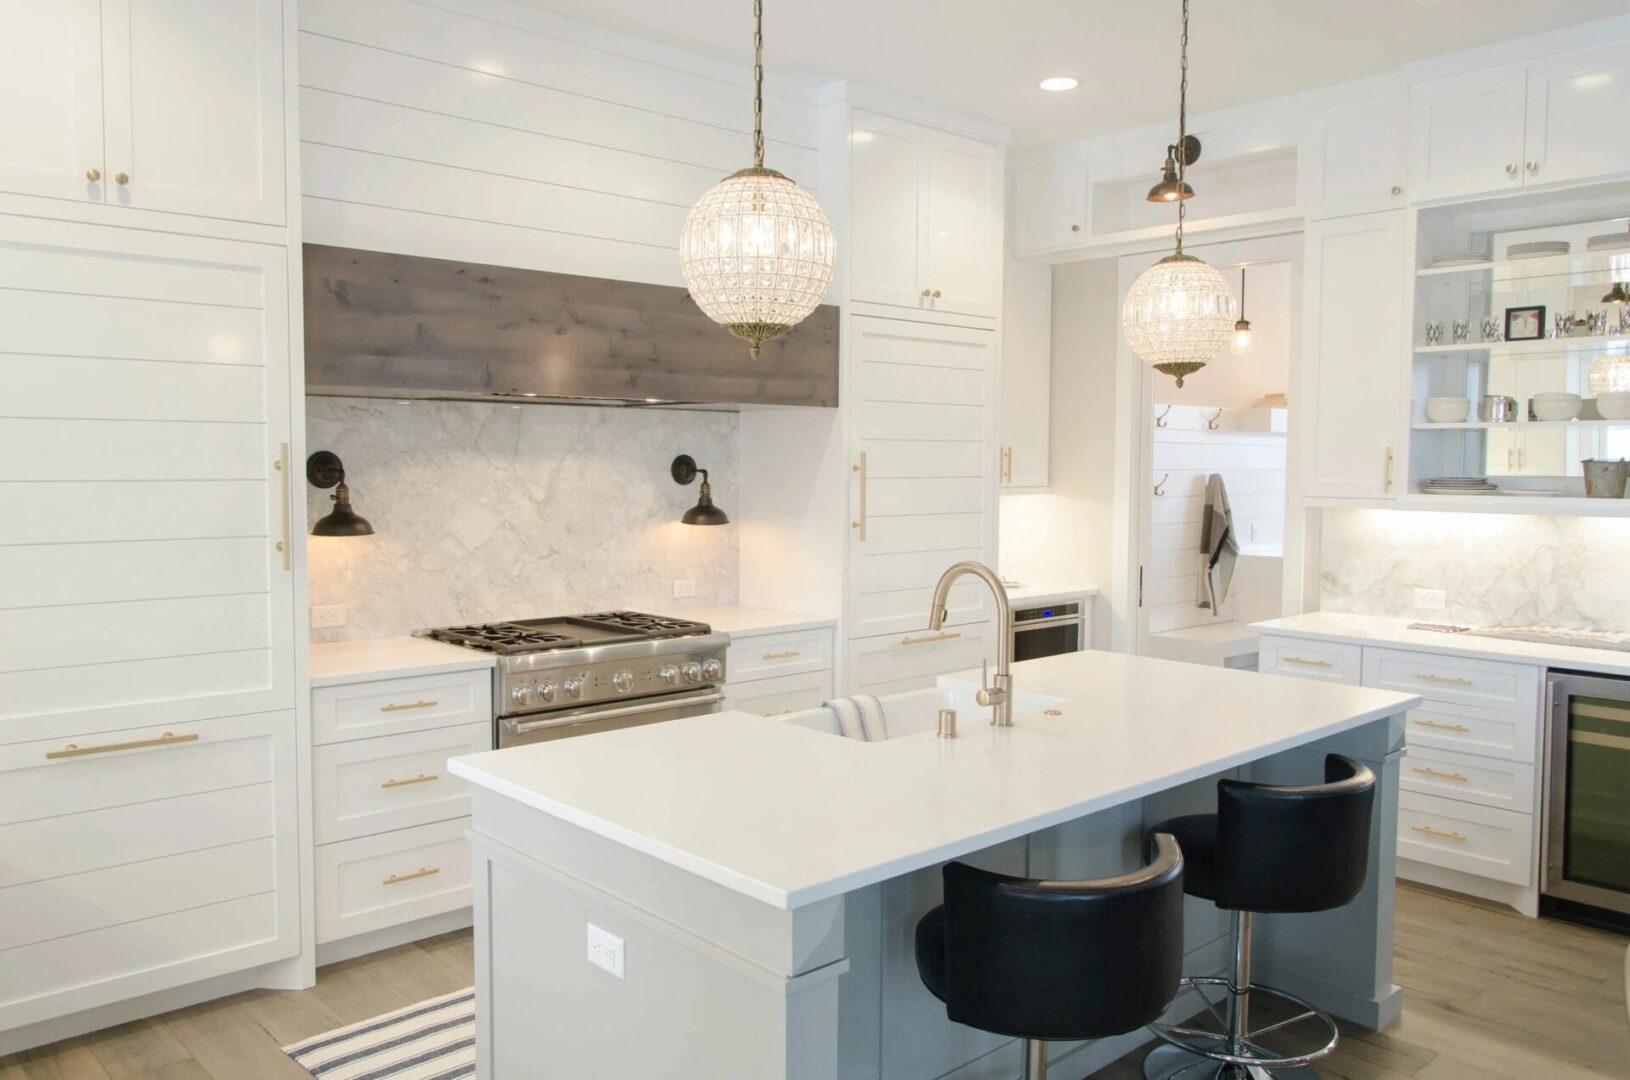 A kitchen with white cabinets and black stools.